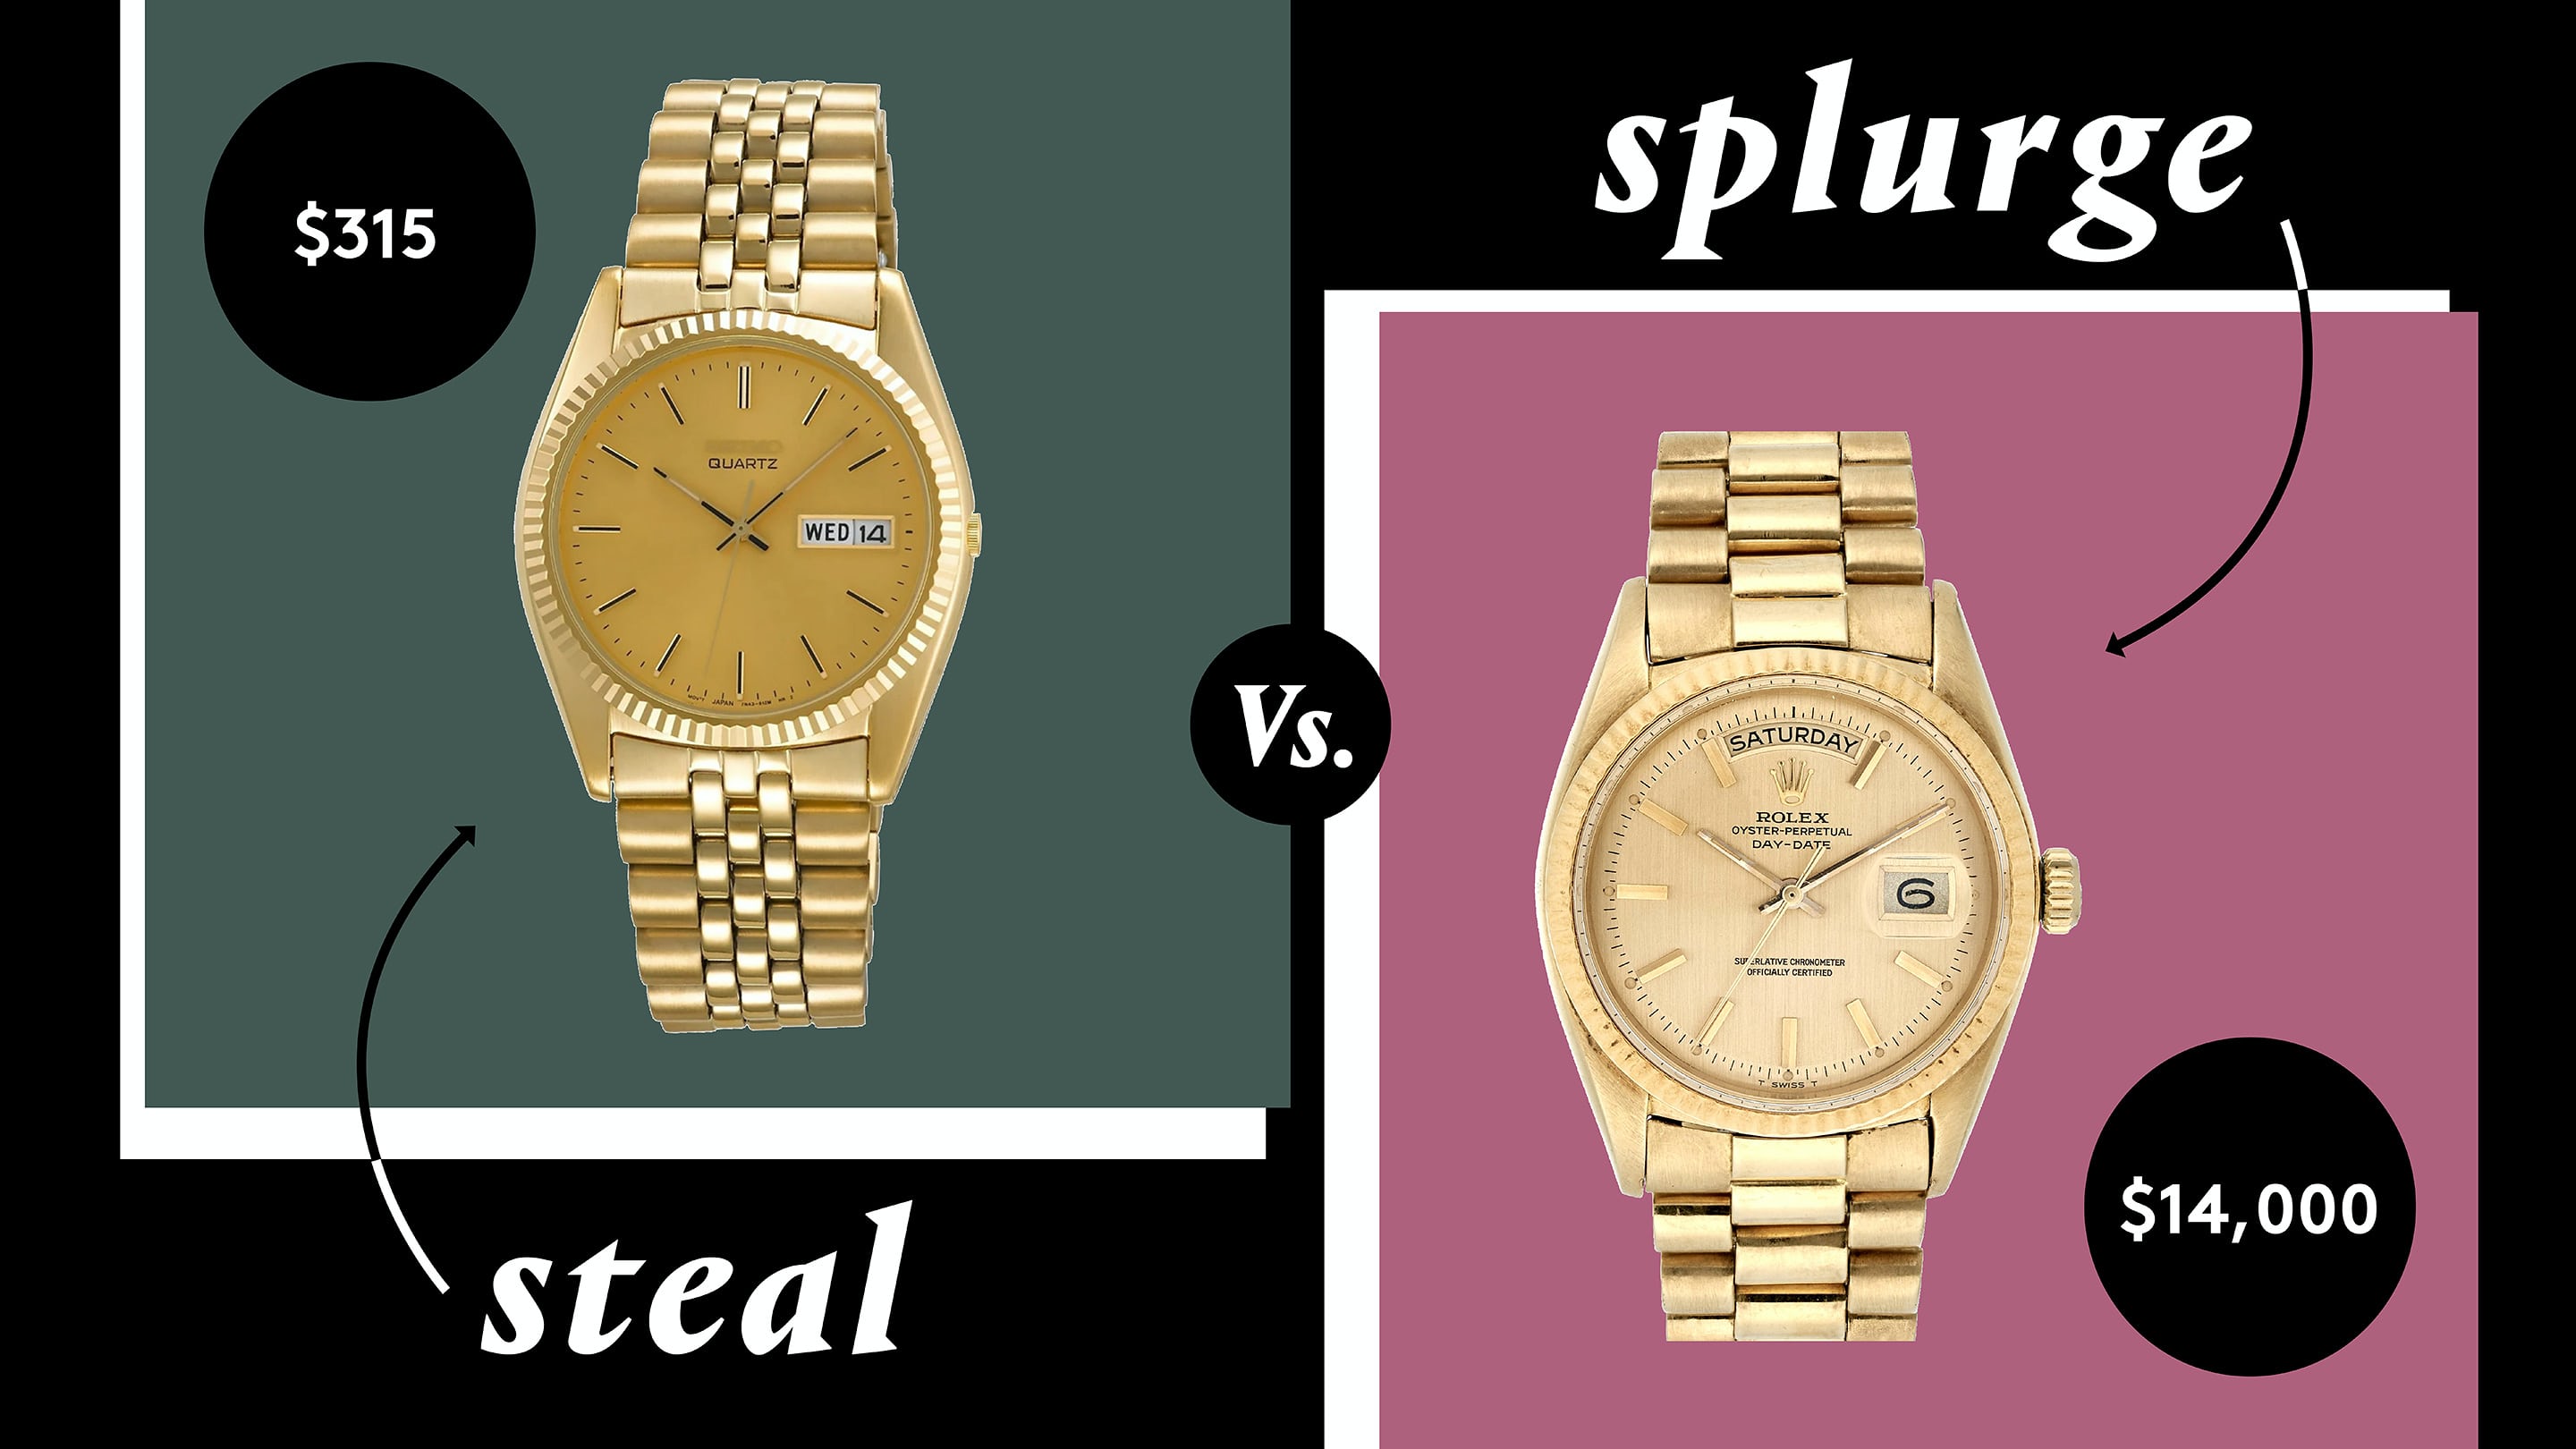 Gold Rolexes: everything that you need to know about the iconic look